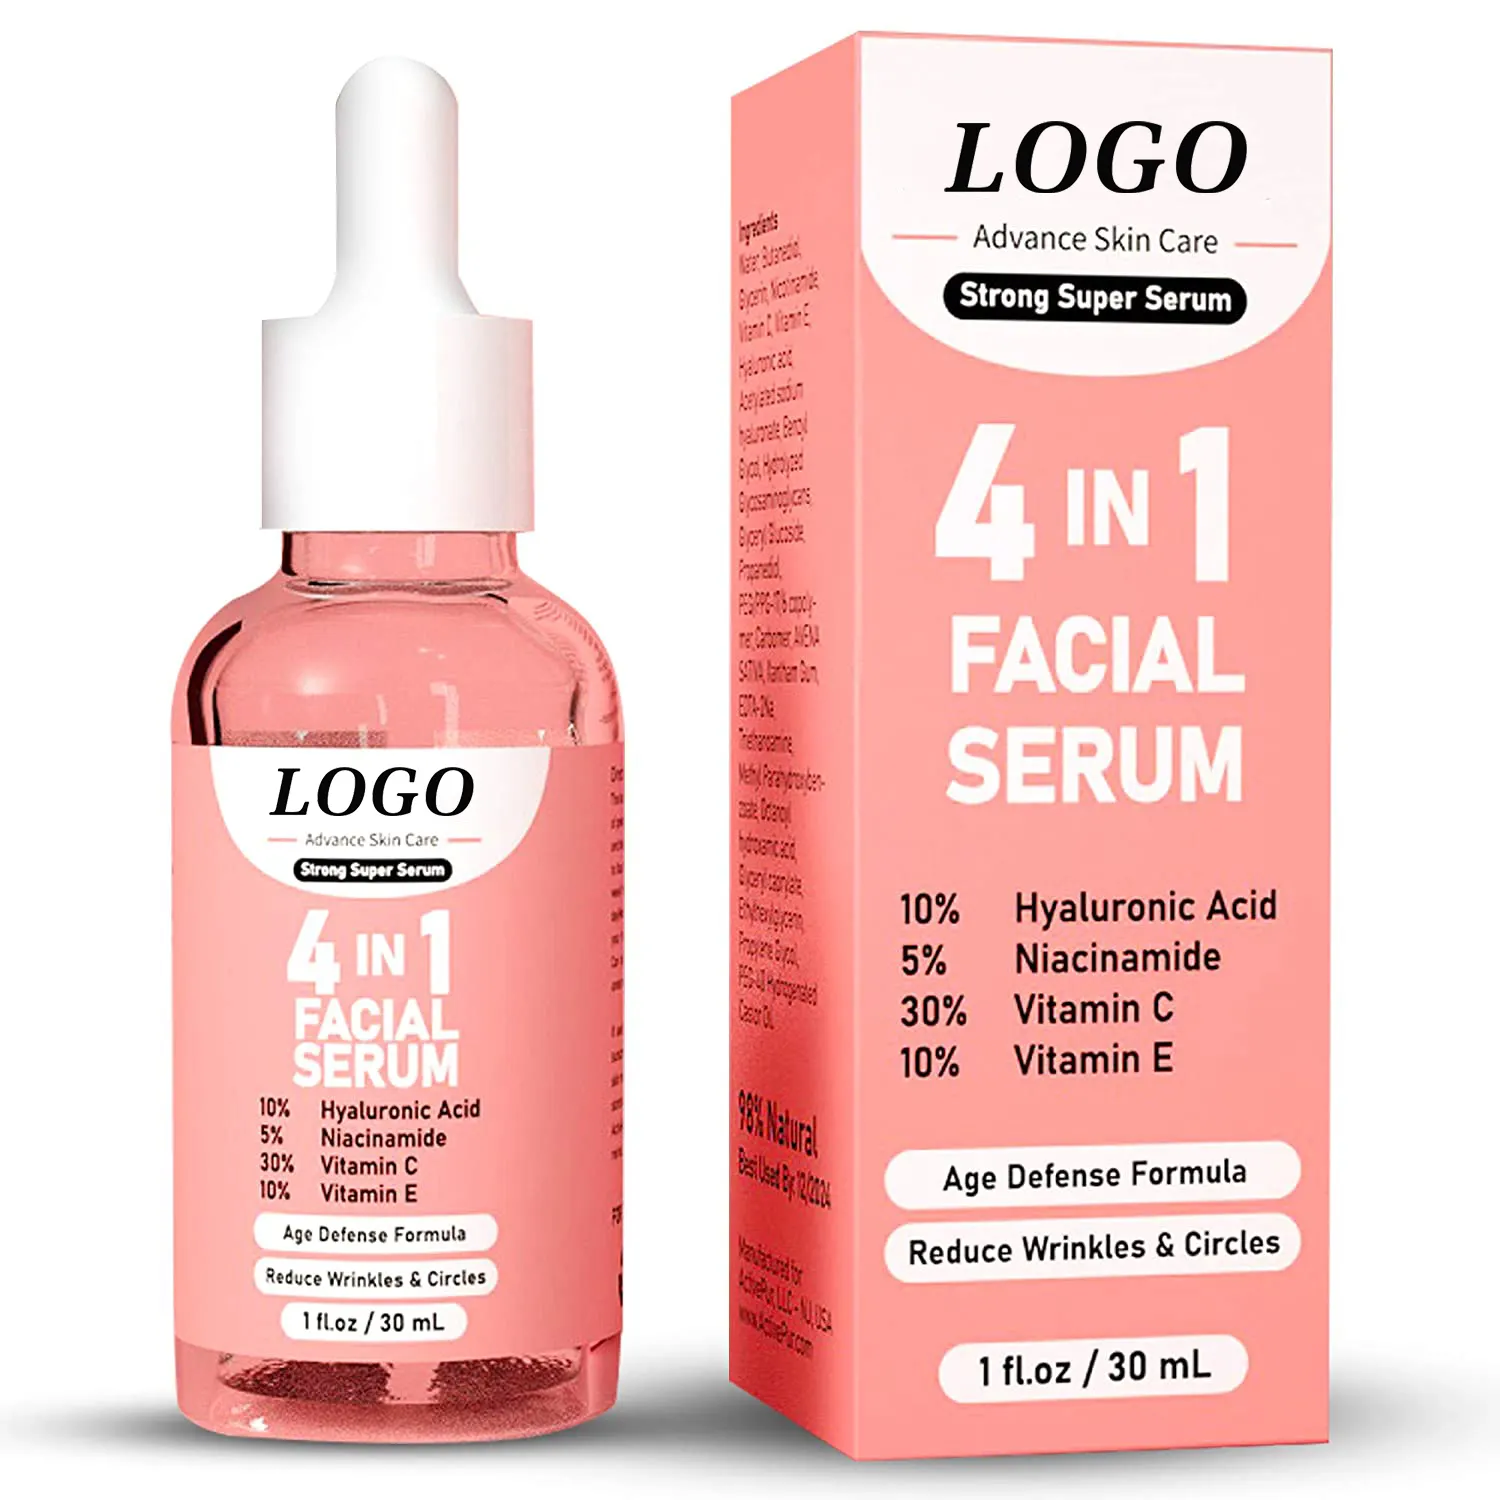 BLIW Hot Sale 4 in 1 Collagen Hyaluronic Acid 30% Vitamin C Serum With HA Vitamin E Nicotinamide Whitening Face Serum